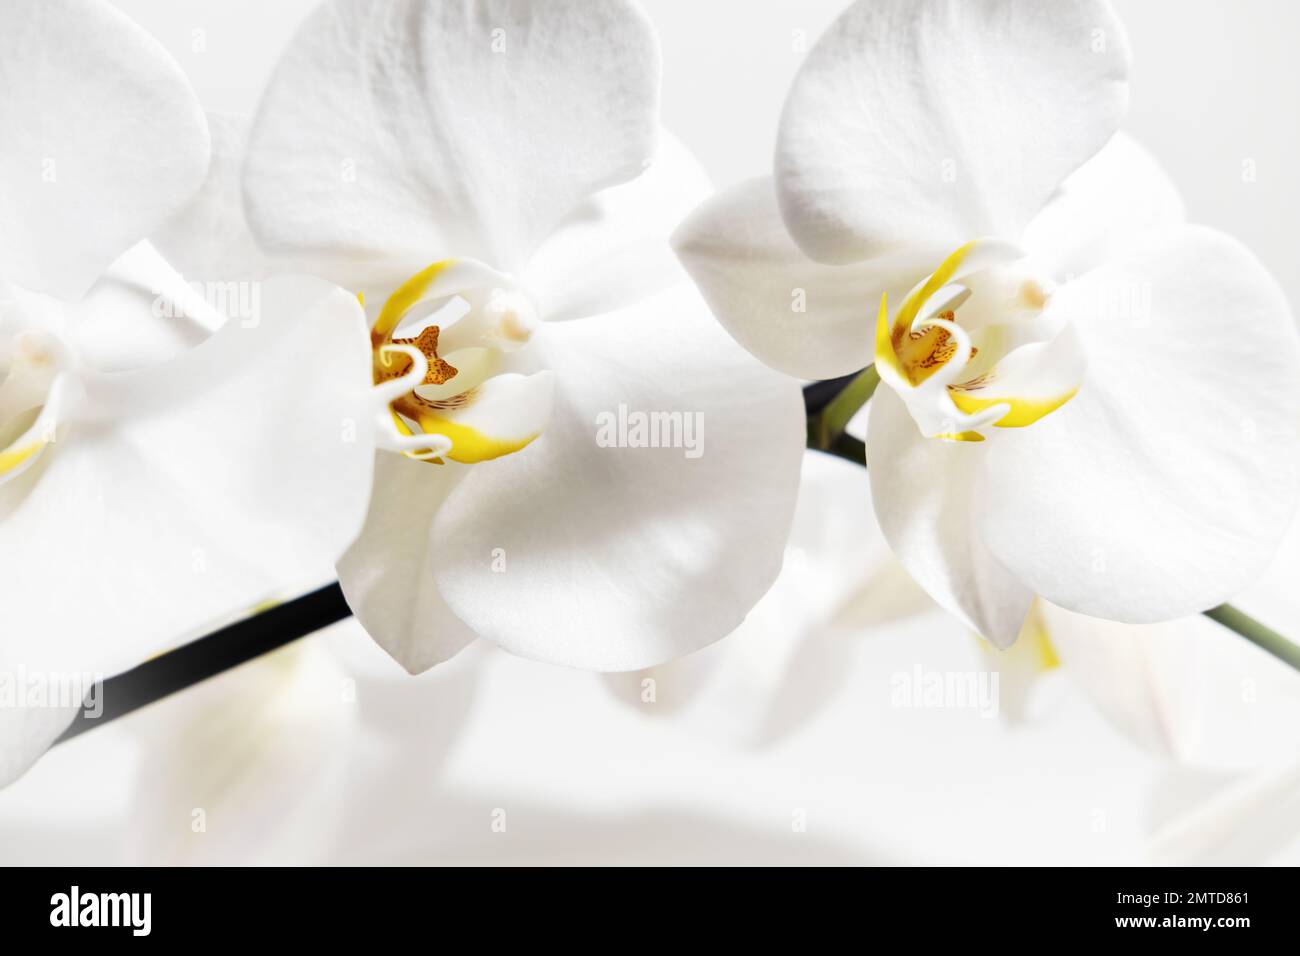 White orchid flowers close-up on a white background. Floral white background. Home tropical plants. Stock Photo